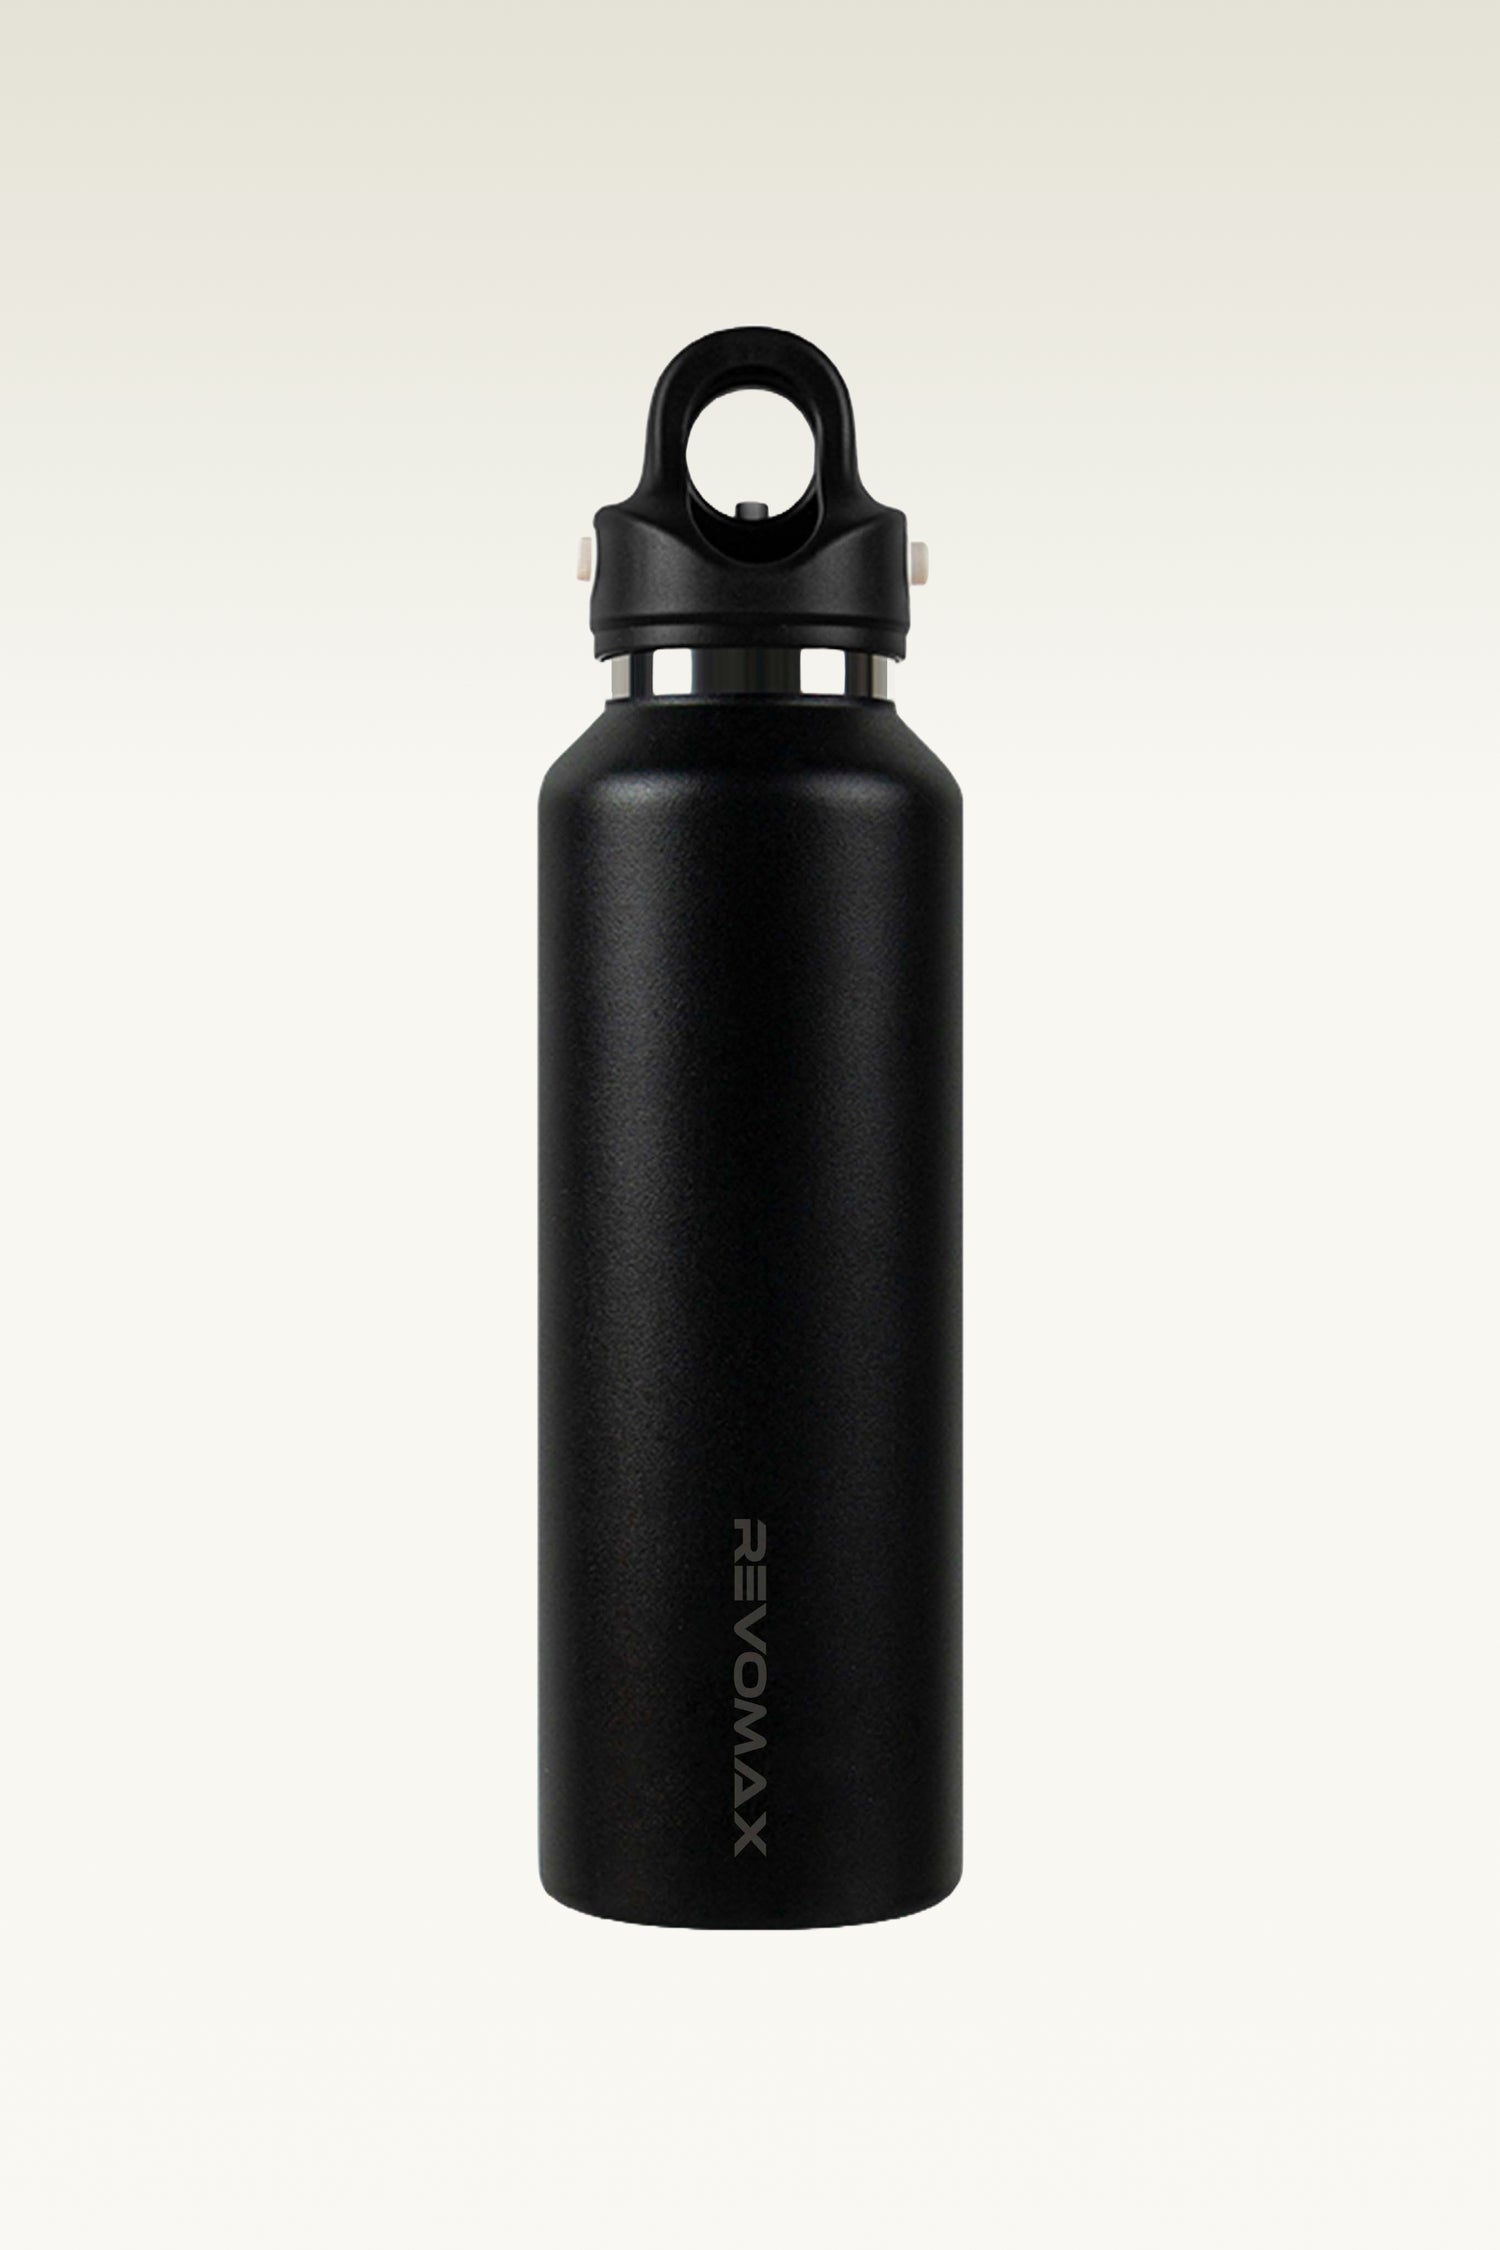 Hikesity's innovative, no-screw design 20oz water bottle; 316L stainless steel lining, exceptional durability, corrosion resistance, and heat retention.